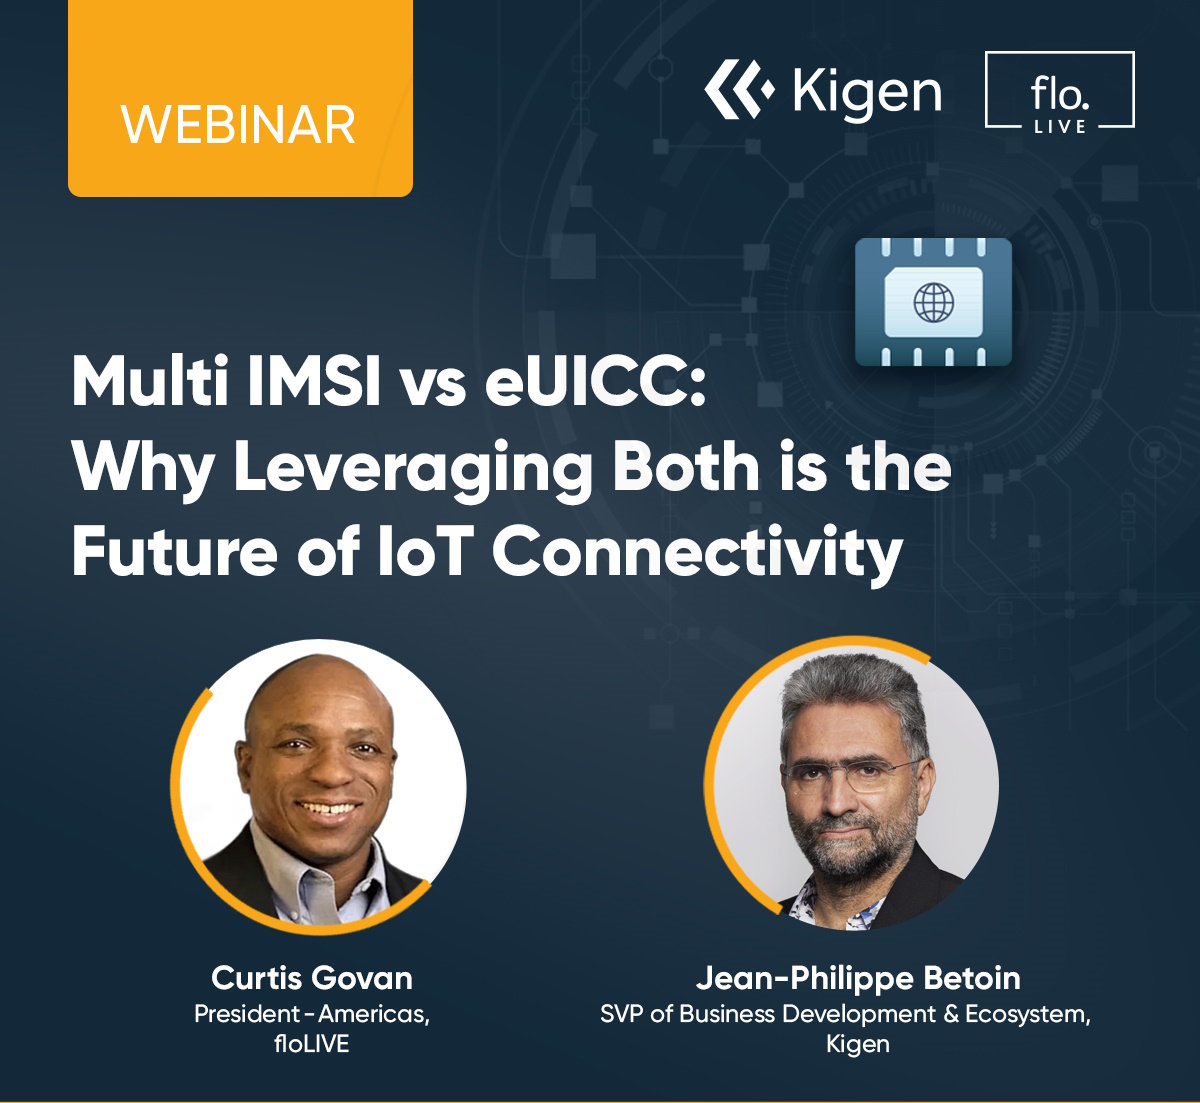 Multi-IMSI vs eUICC: Why Leveraging Both is the Future of IoT Connectivity